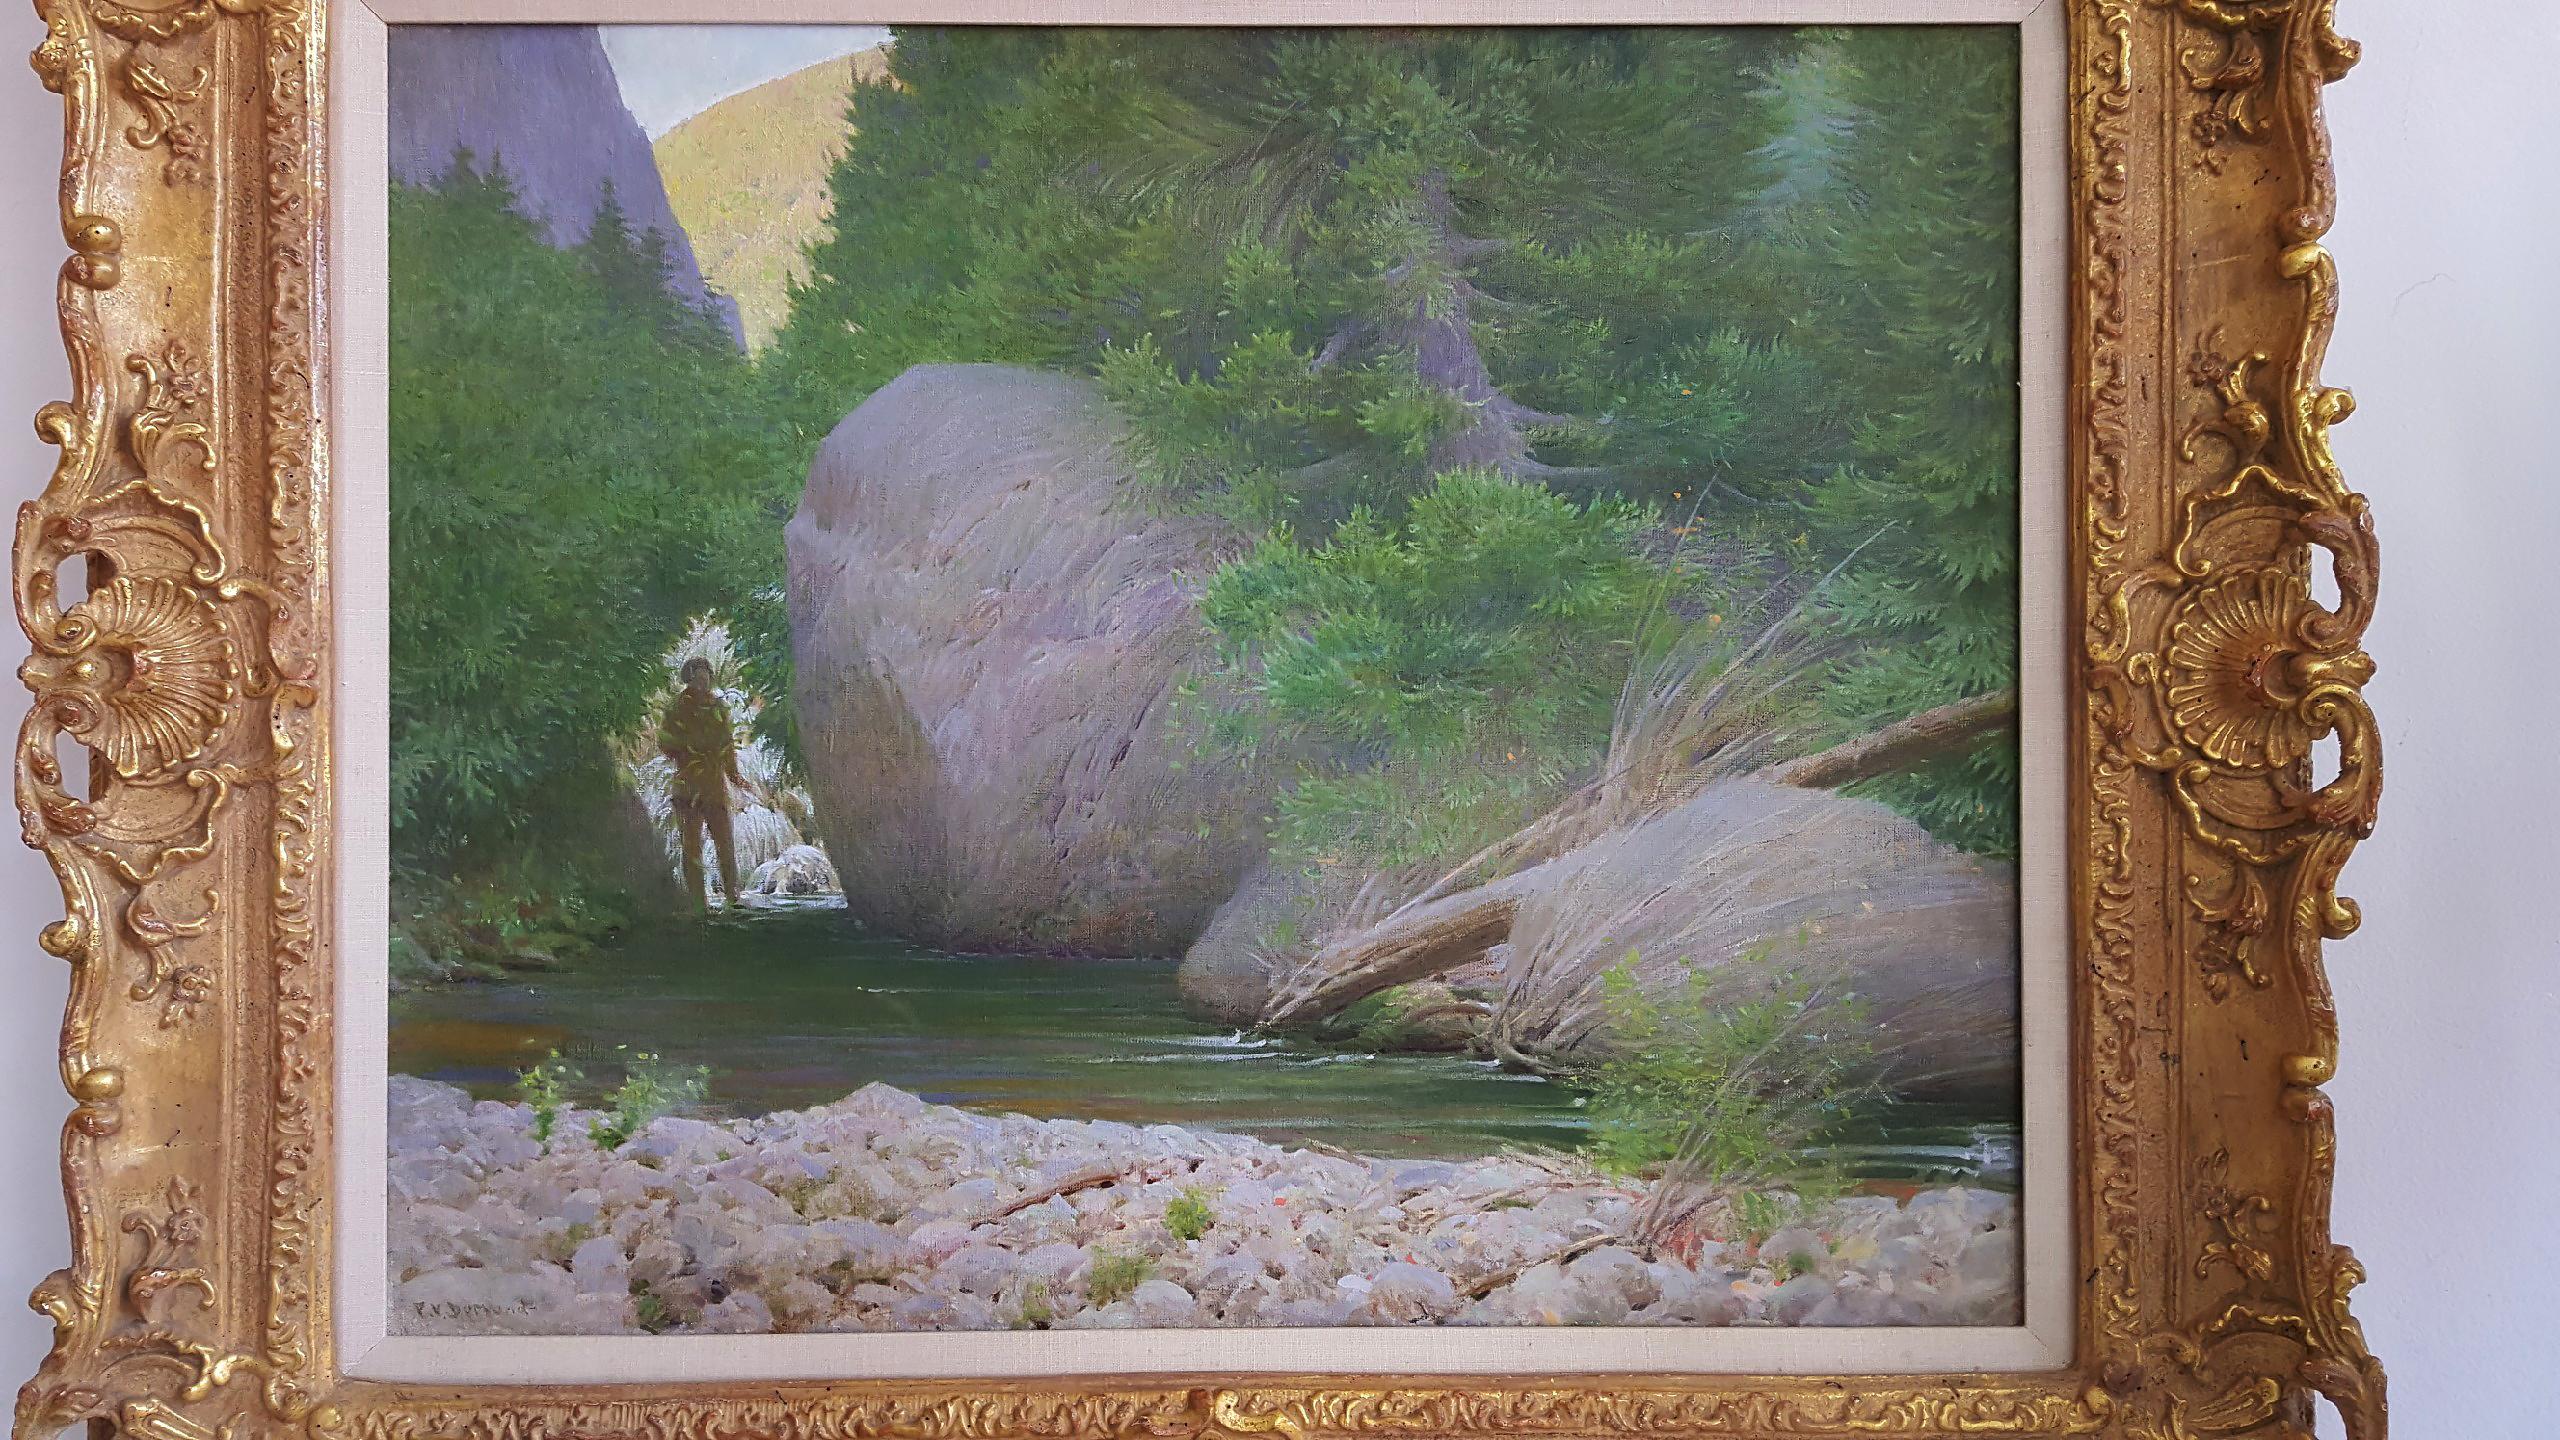 Trout Rock
Signed lower left: F. V. Dumond
Titled on stretcher with artist's estate stamp: Trout Rock
From a Texas Estate. 

Frank Vincent Dumond was an artist, illustrator, and painter of the Tonalist school. This work was most likely done in Nova